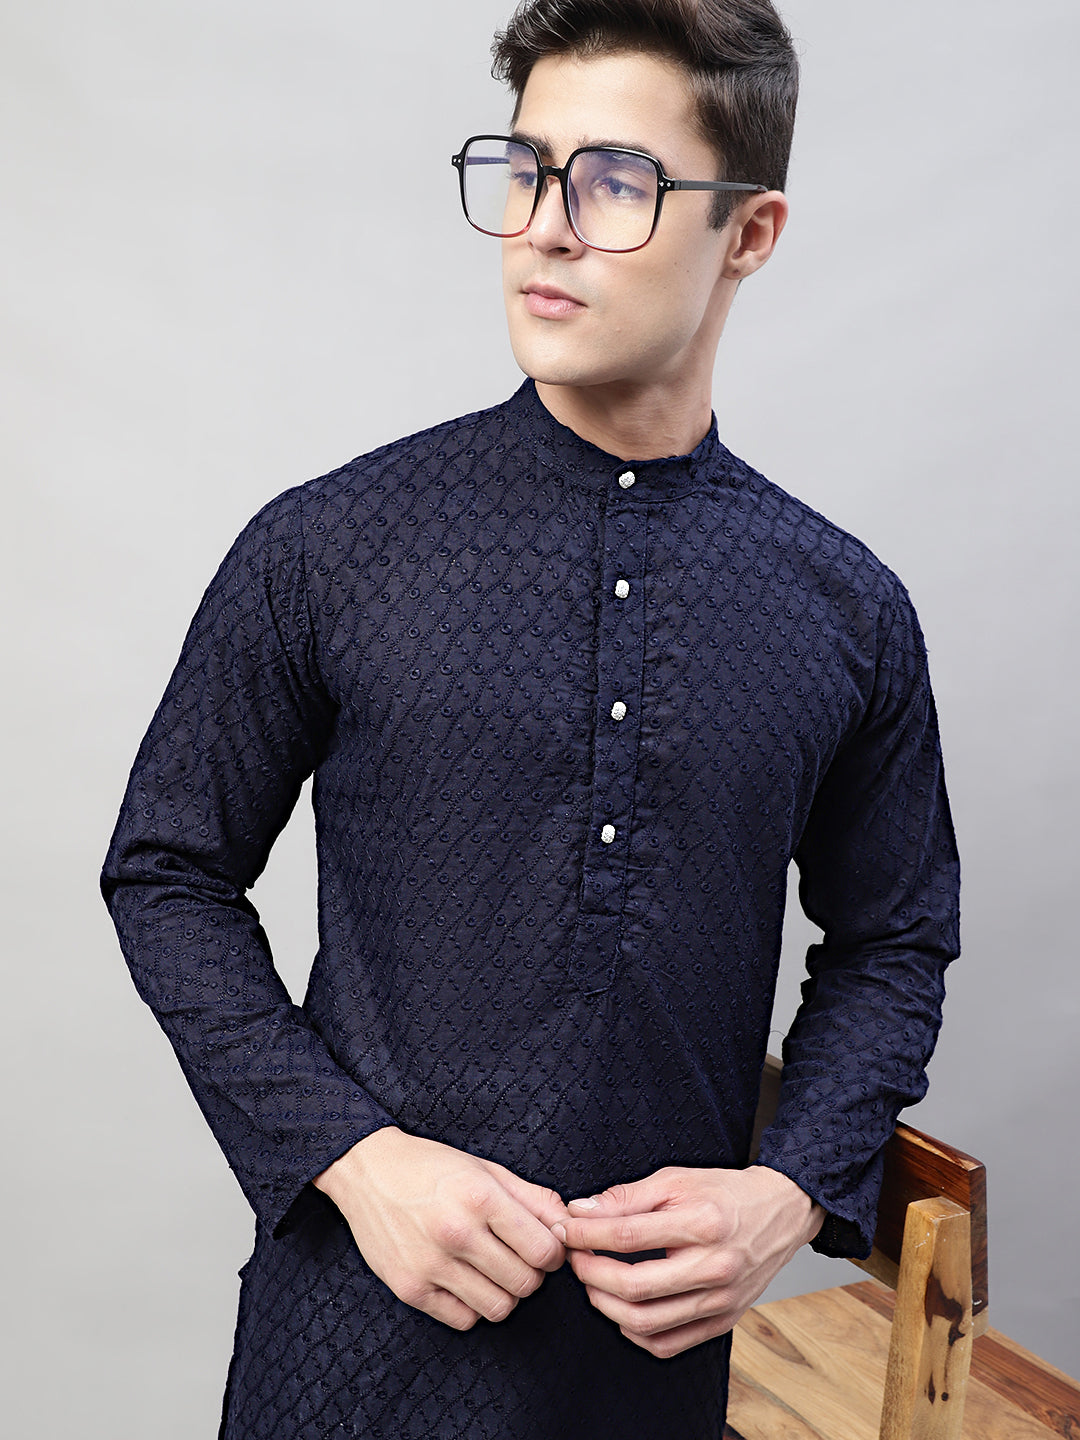 Short Kurta For Men - 15 Latest and Stylish Collection are Trending Now